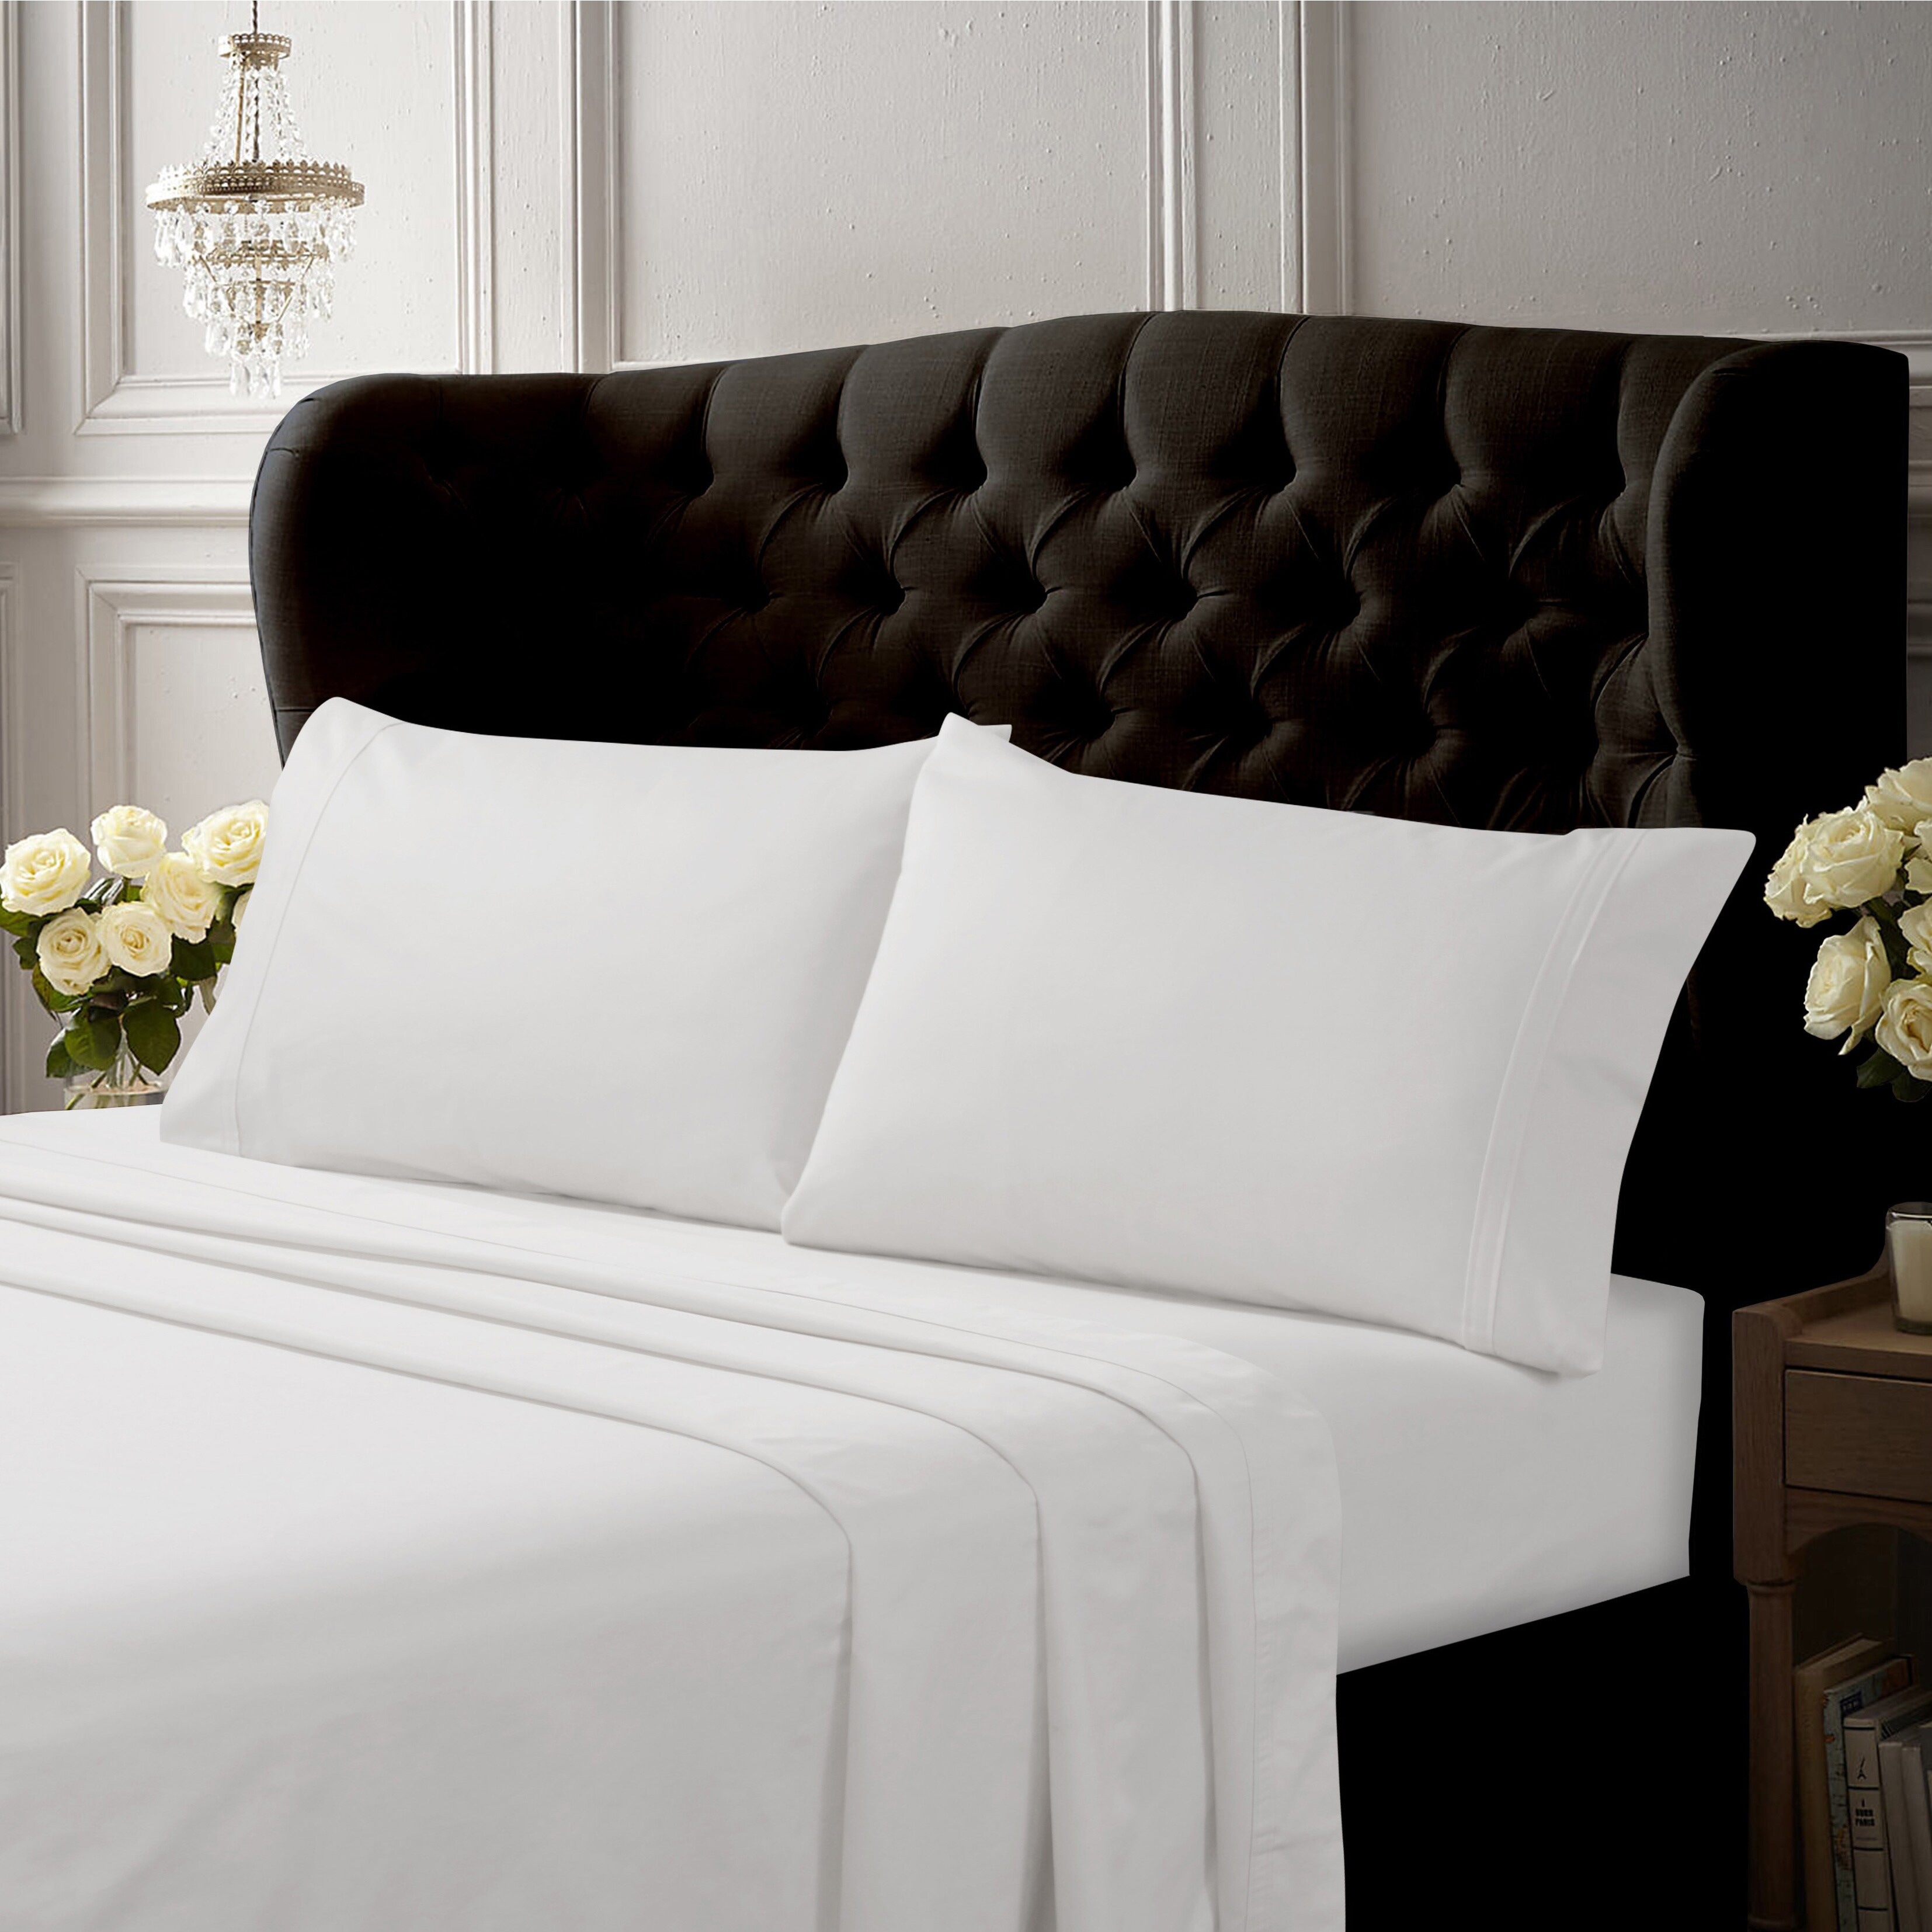 1 Piece Fitted/Bottom Sheet Ultra Soft 1000 TC Egyptian Cotton White Solid